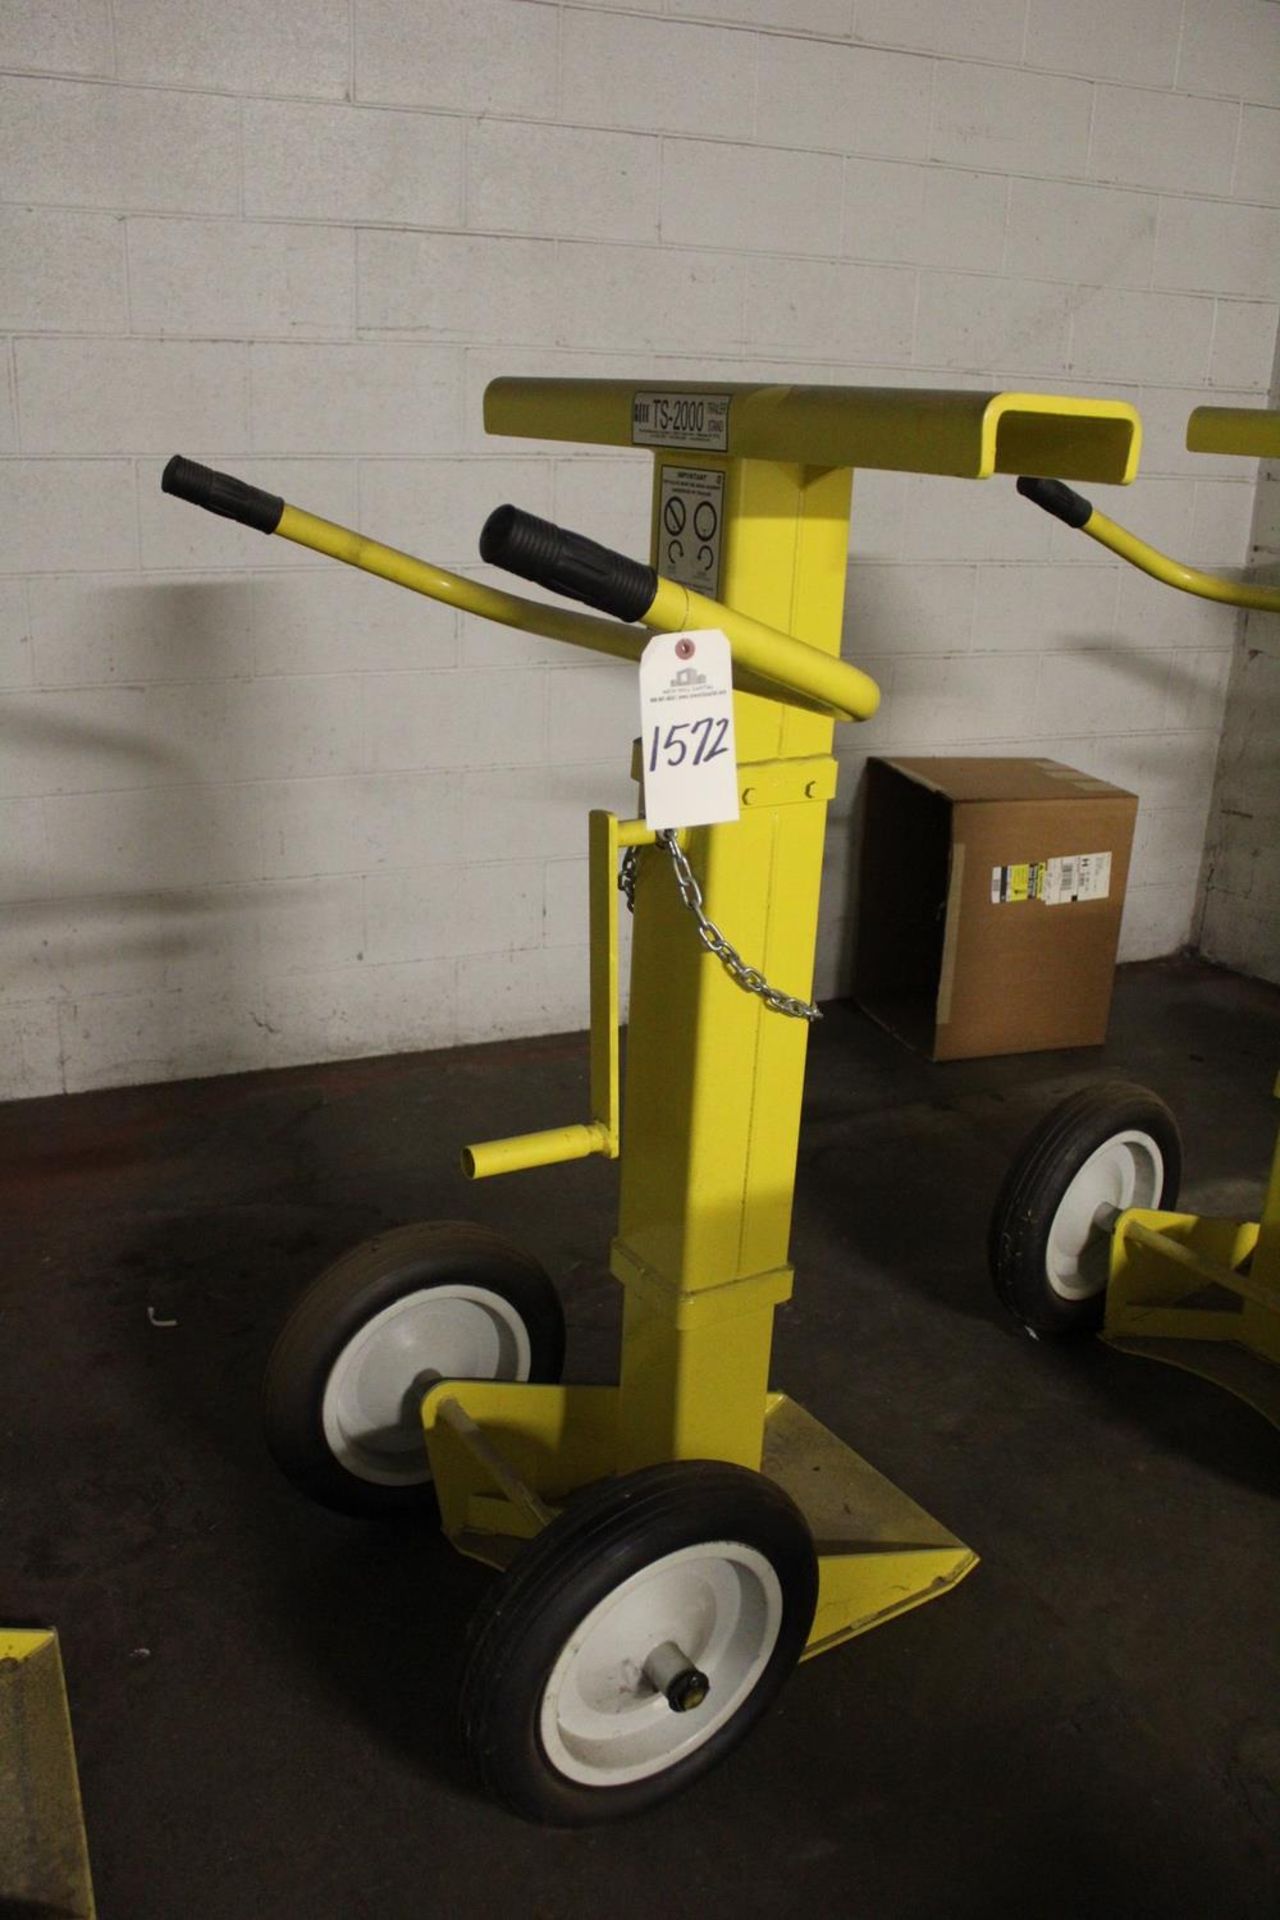 Rite Hite TS-2000 Trailer Stand - Subject to Bulk Bid Lot 15 | Rig Fee: Hand Carry or Contact Rigger